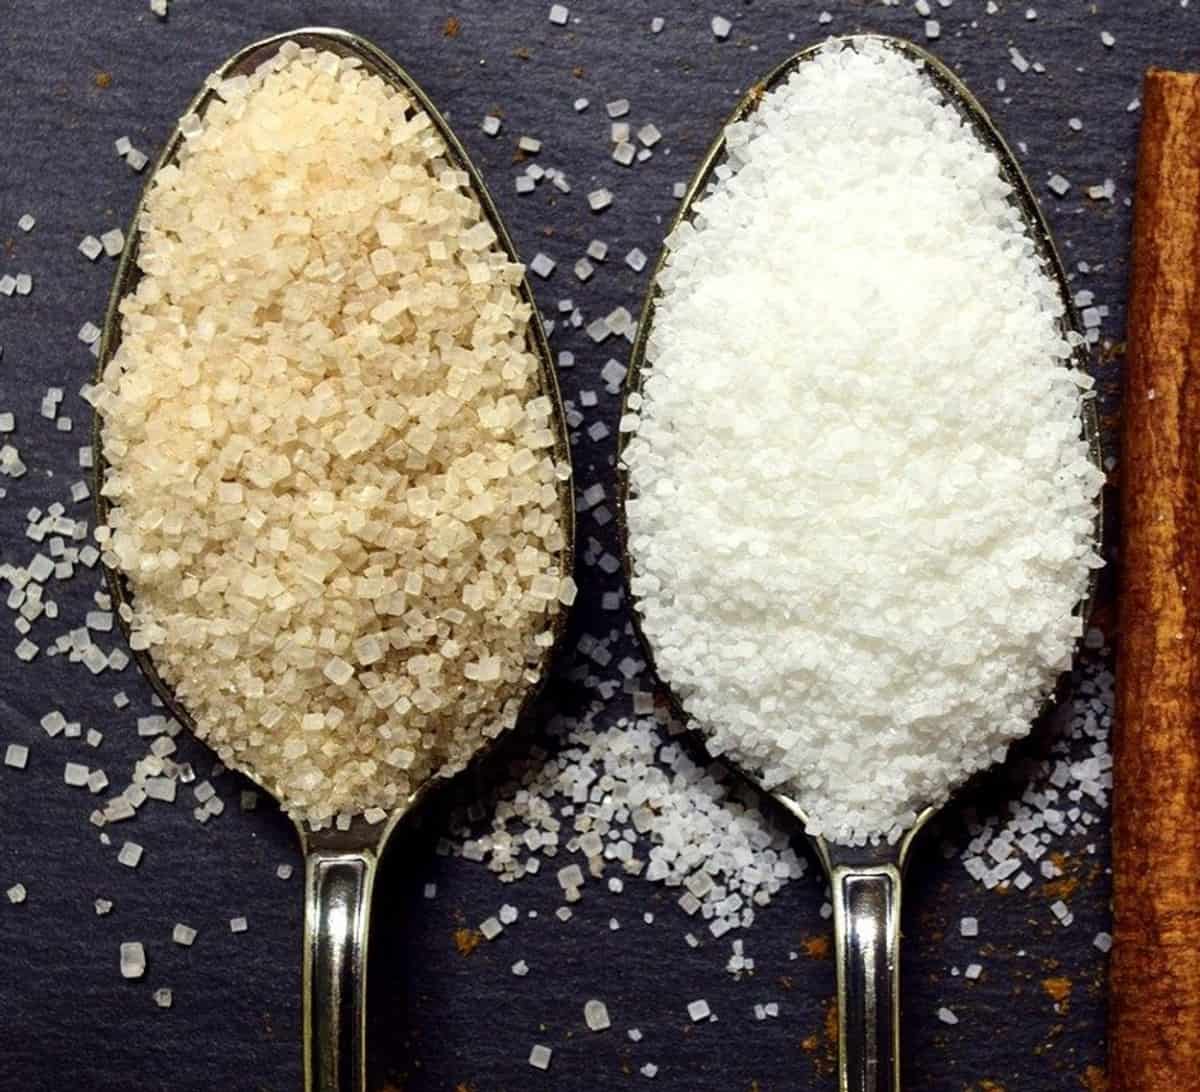 Brown and white sugar in two different spoons.